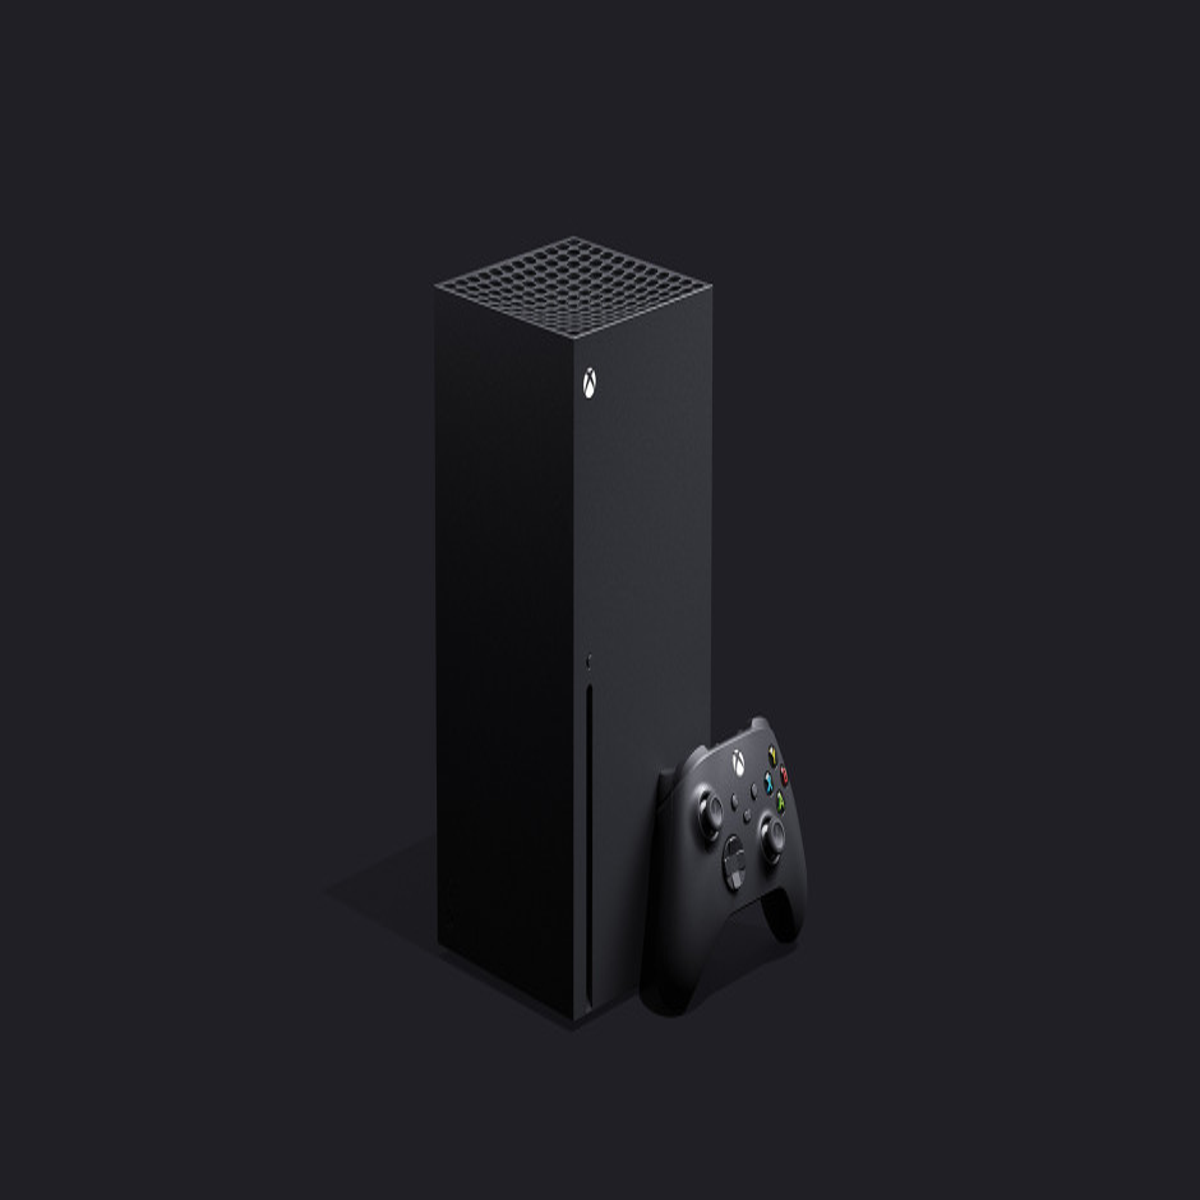 Xbox Series X and H.265 - Play 4K H.265 on Xbox Series X from USB